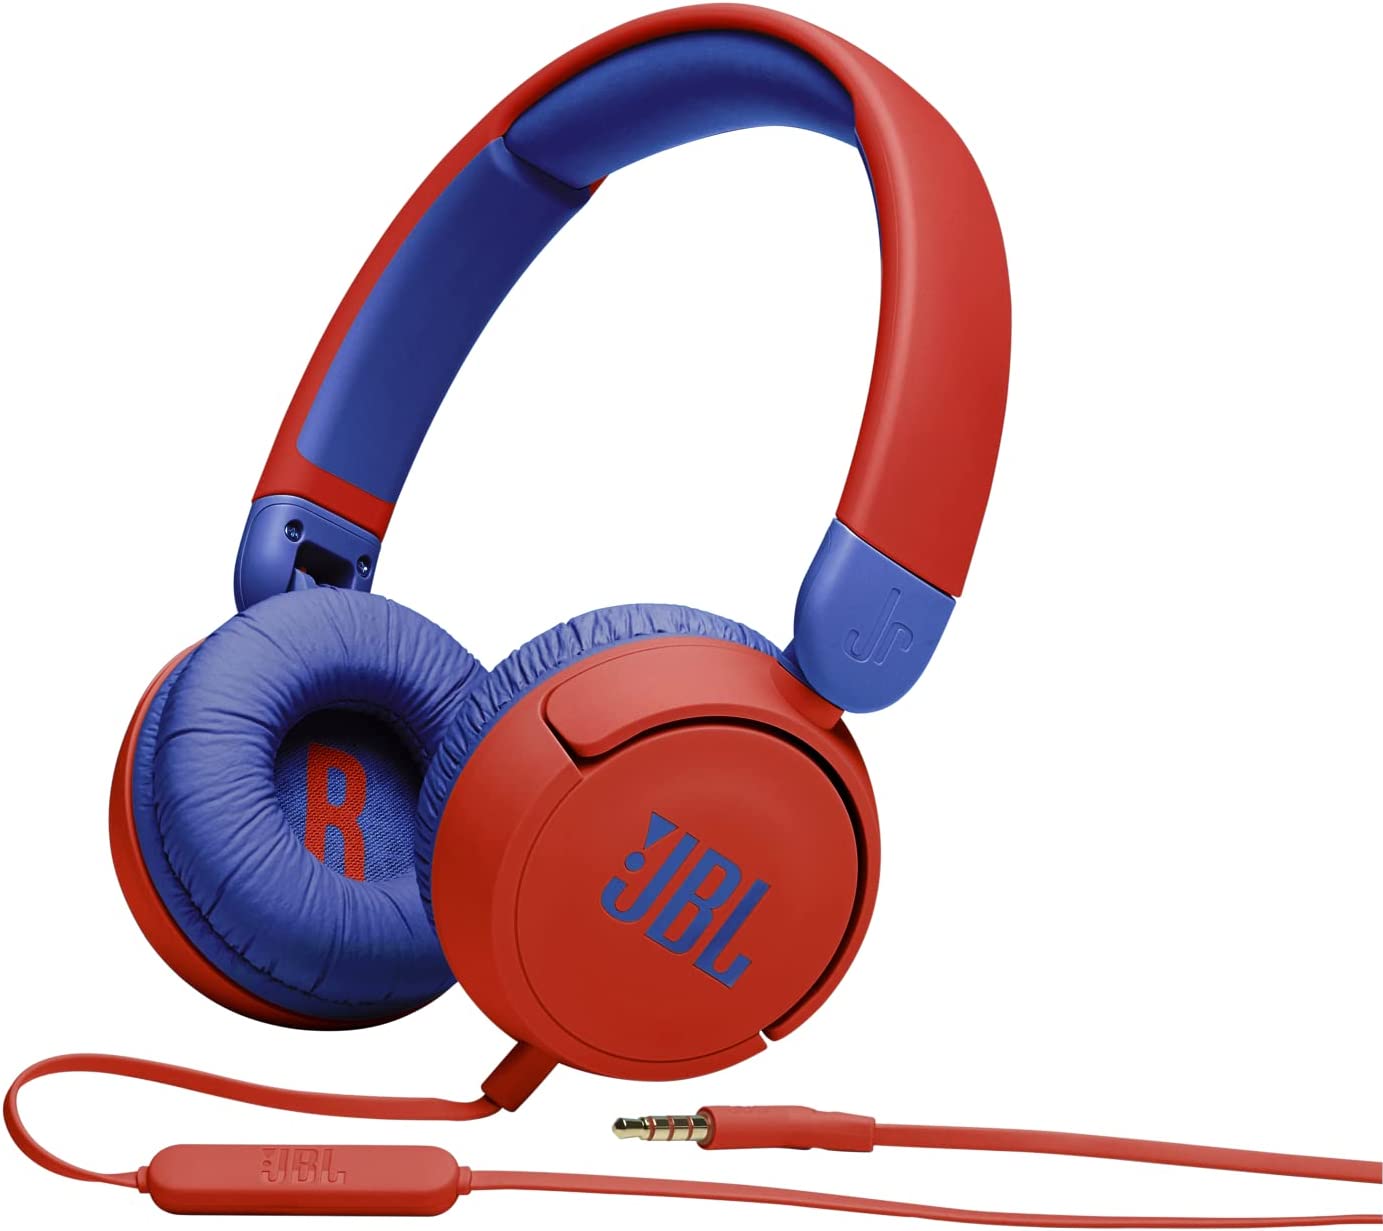 udgifterne couscous Støt JBL Jr 310 - Children's over-ear headphones with aux cable and built-in  microphone, in red | Nairobi Computer Shop